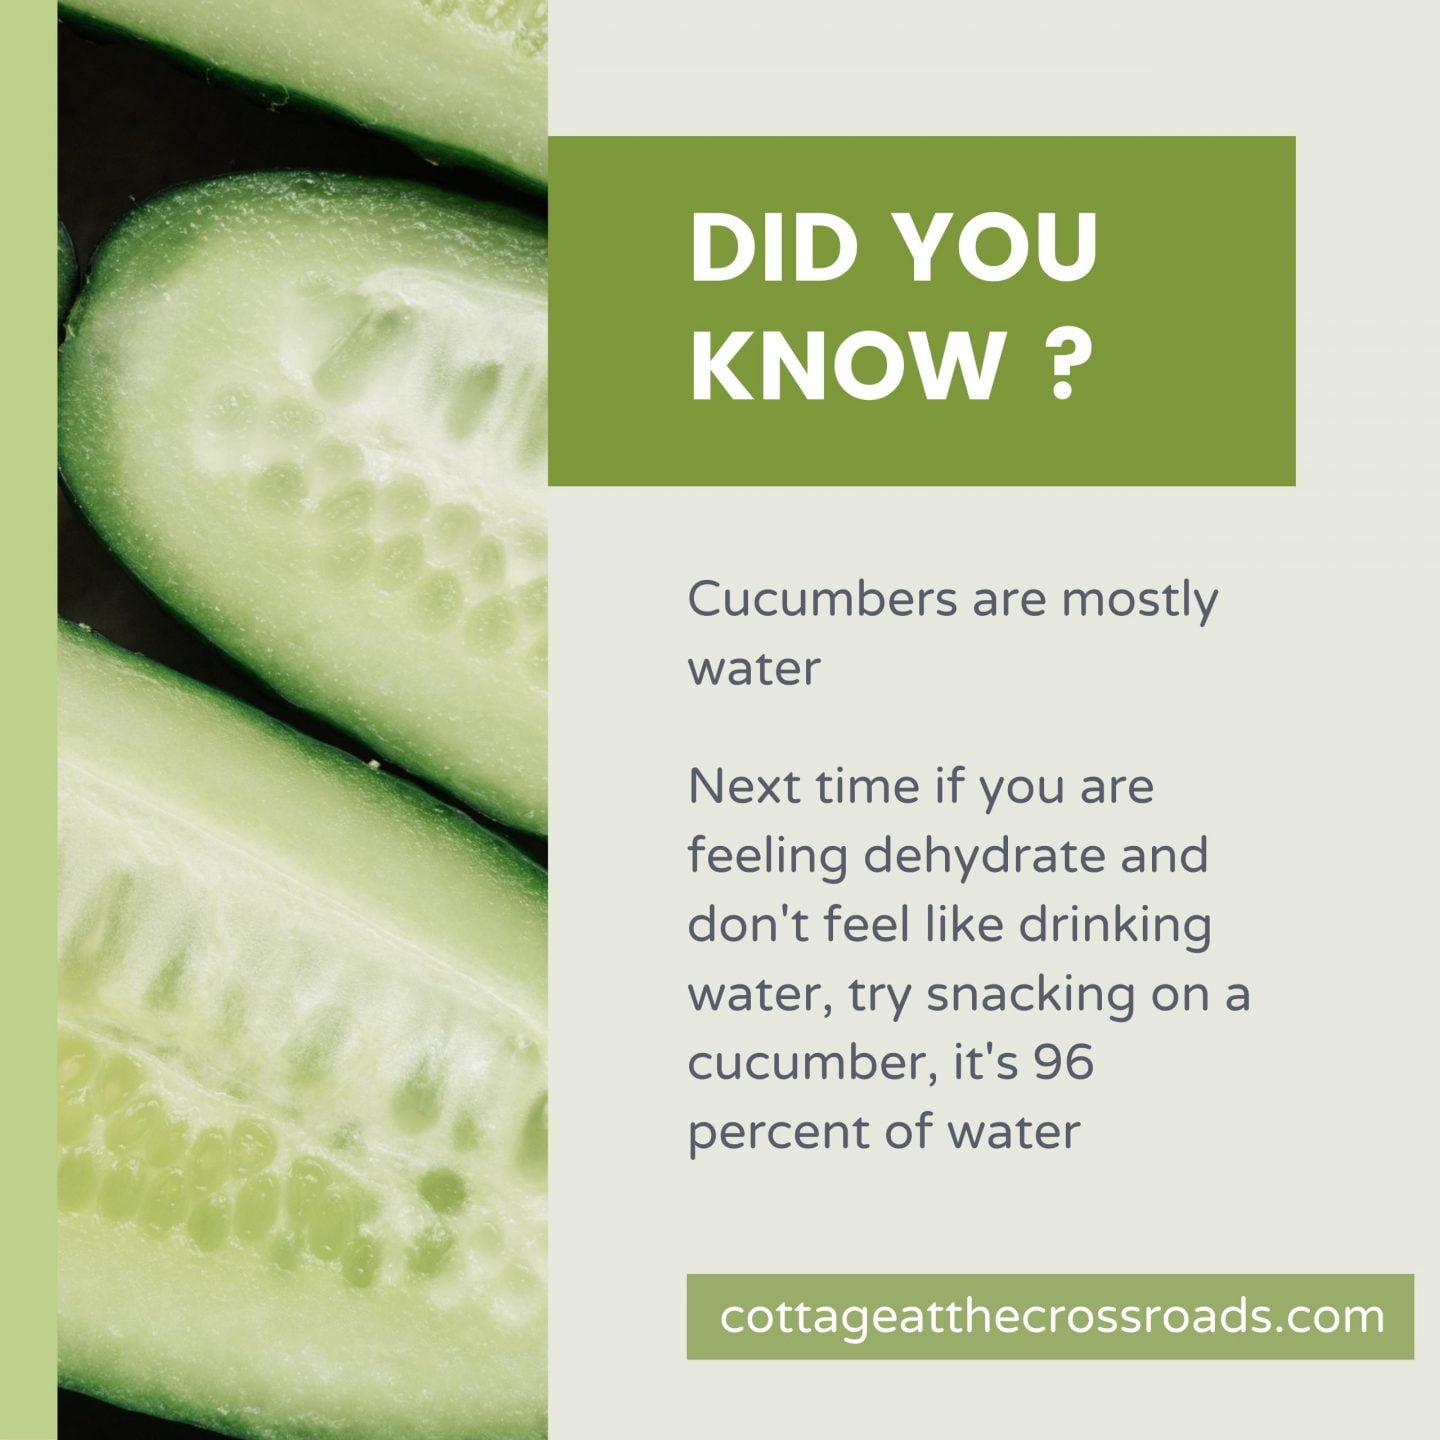 Did you know, cucumbers are mostly water